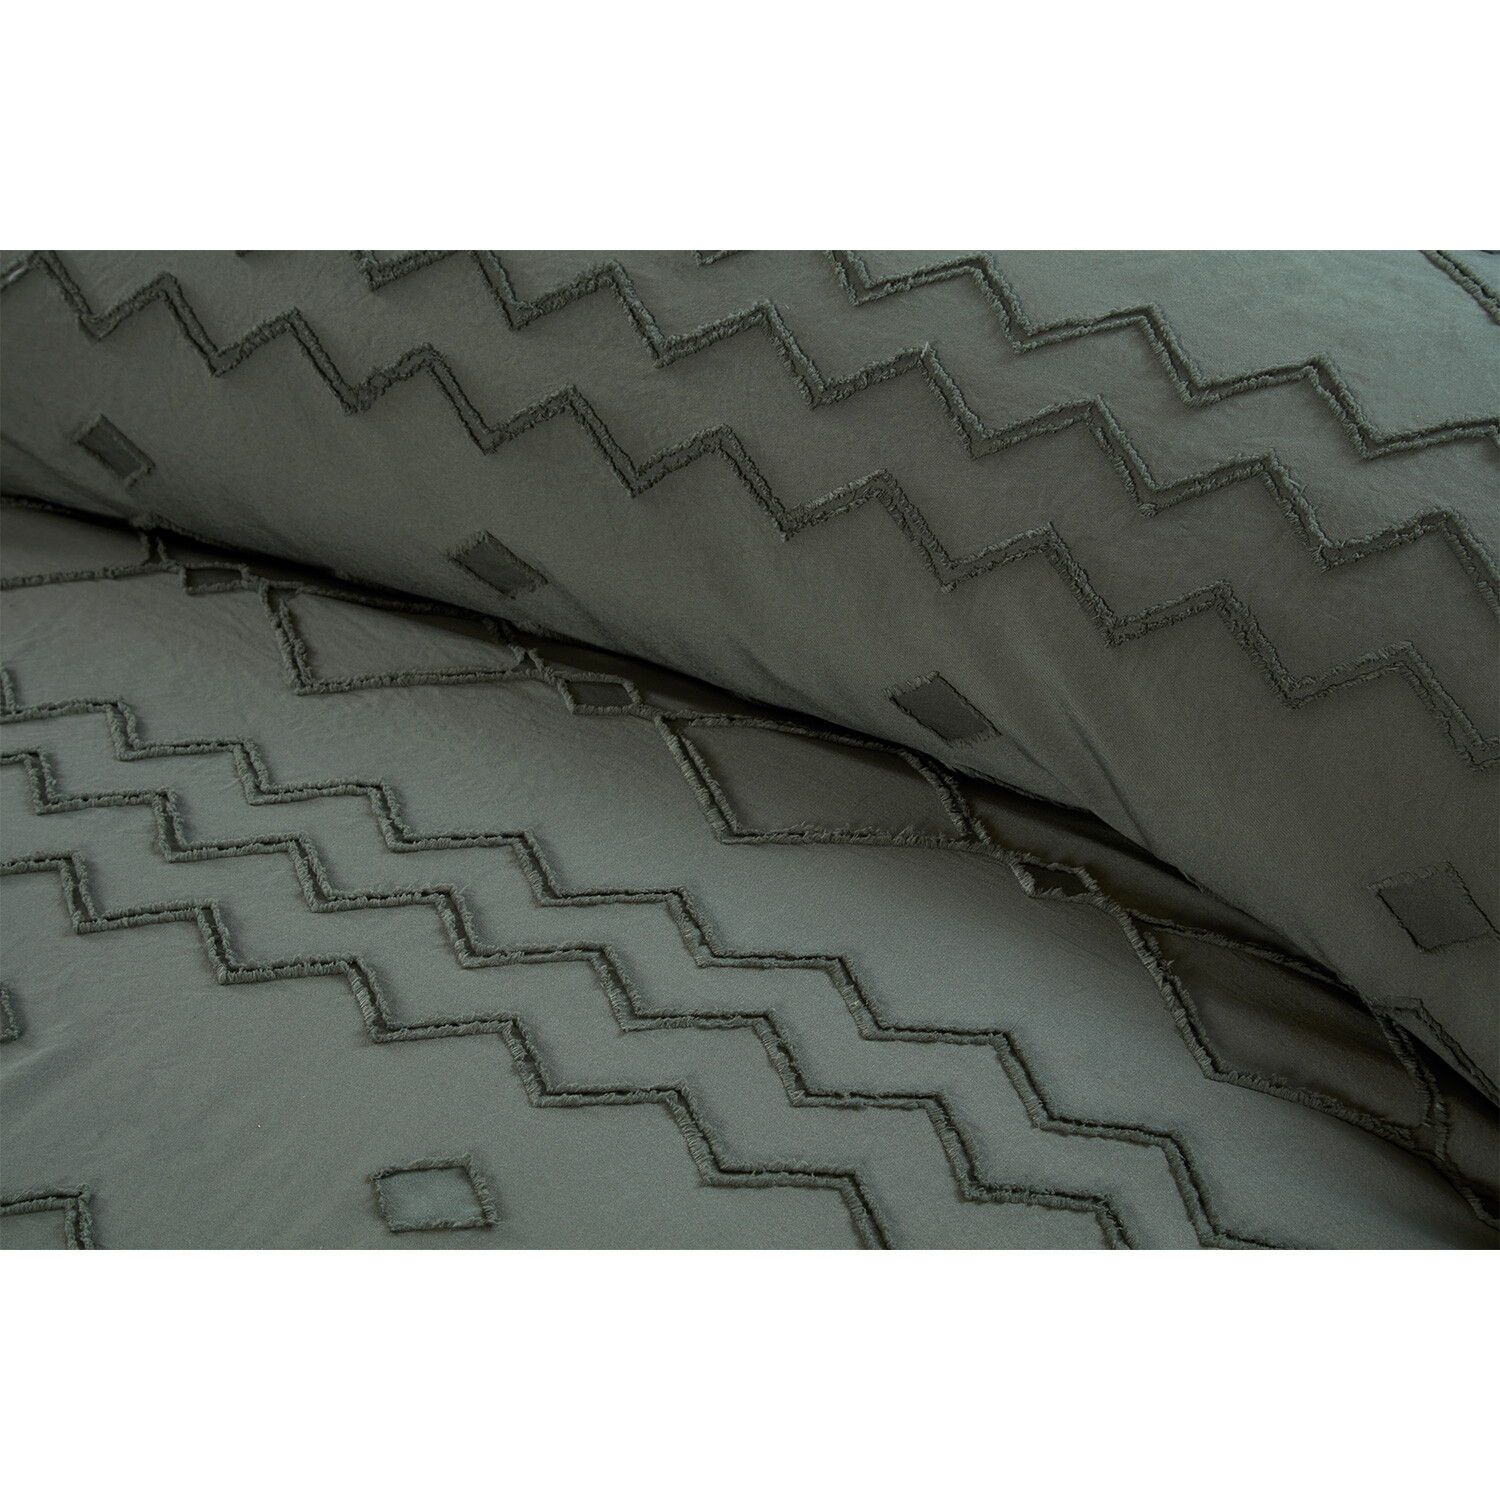 Adah Tufted Geo Duvet Cover and Pillowcase Set - Charcoal / King Image 3